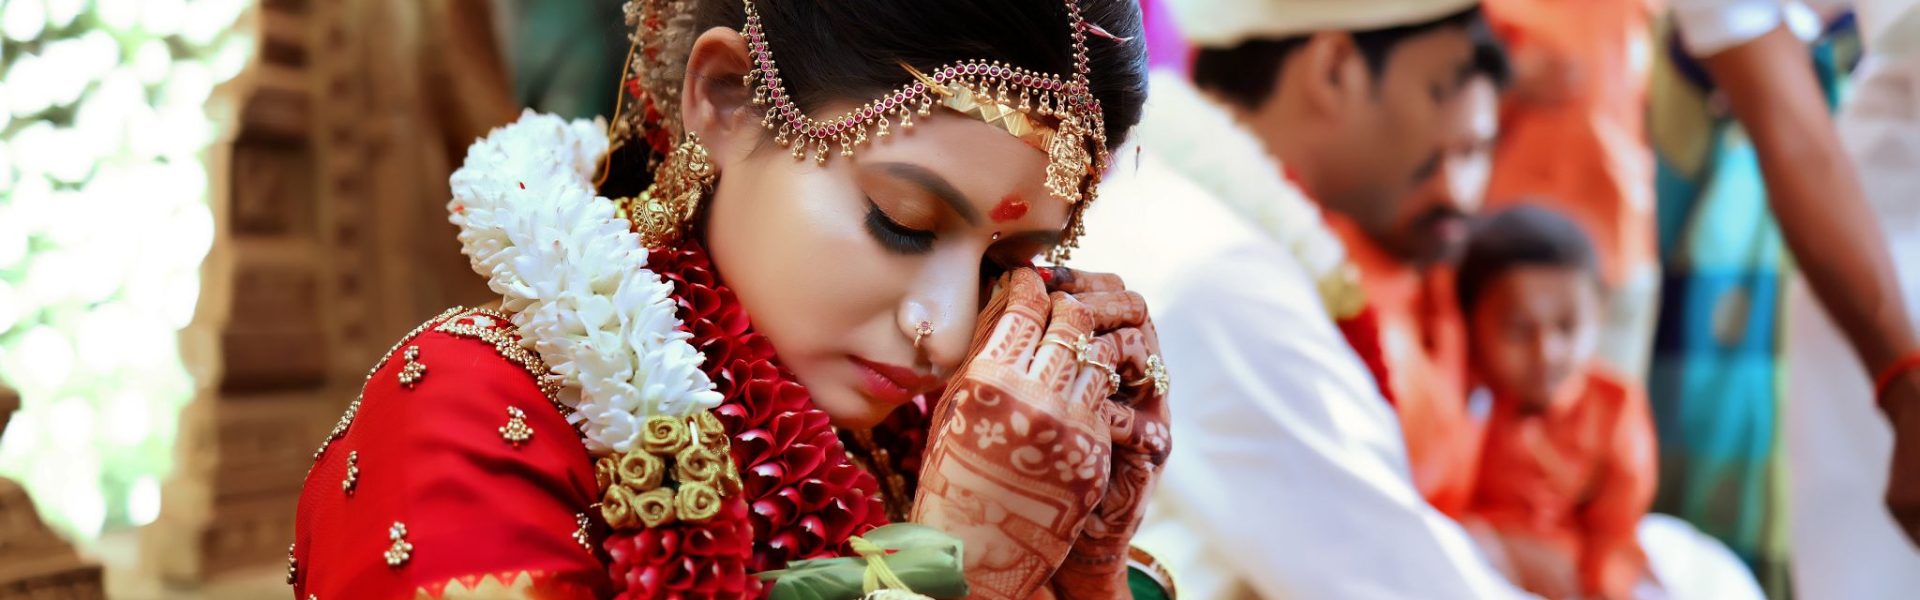 Wedding Photography Packages Affordable Wedding Photography - Your Day Captured!